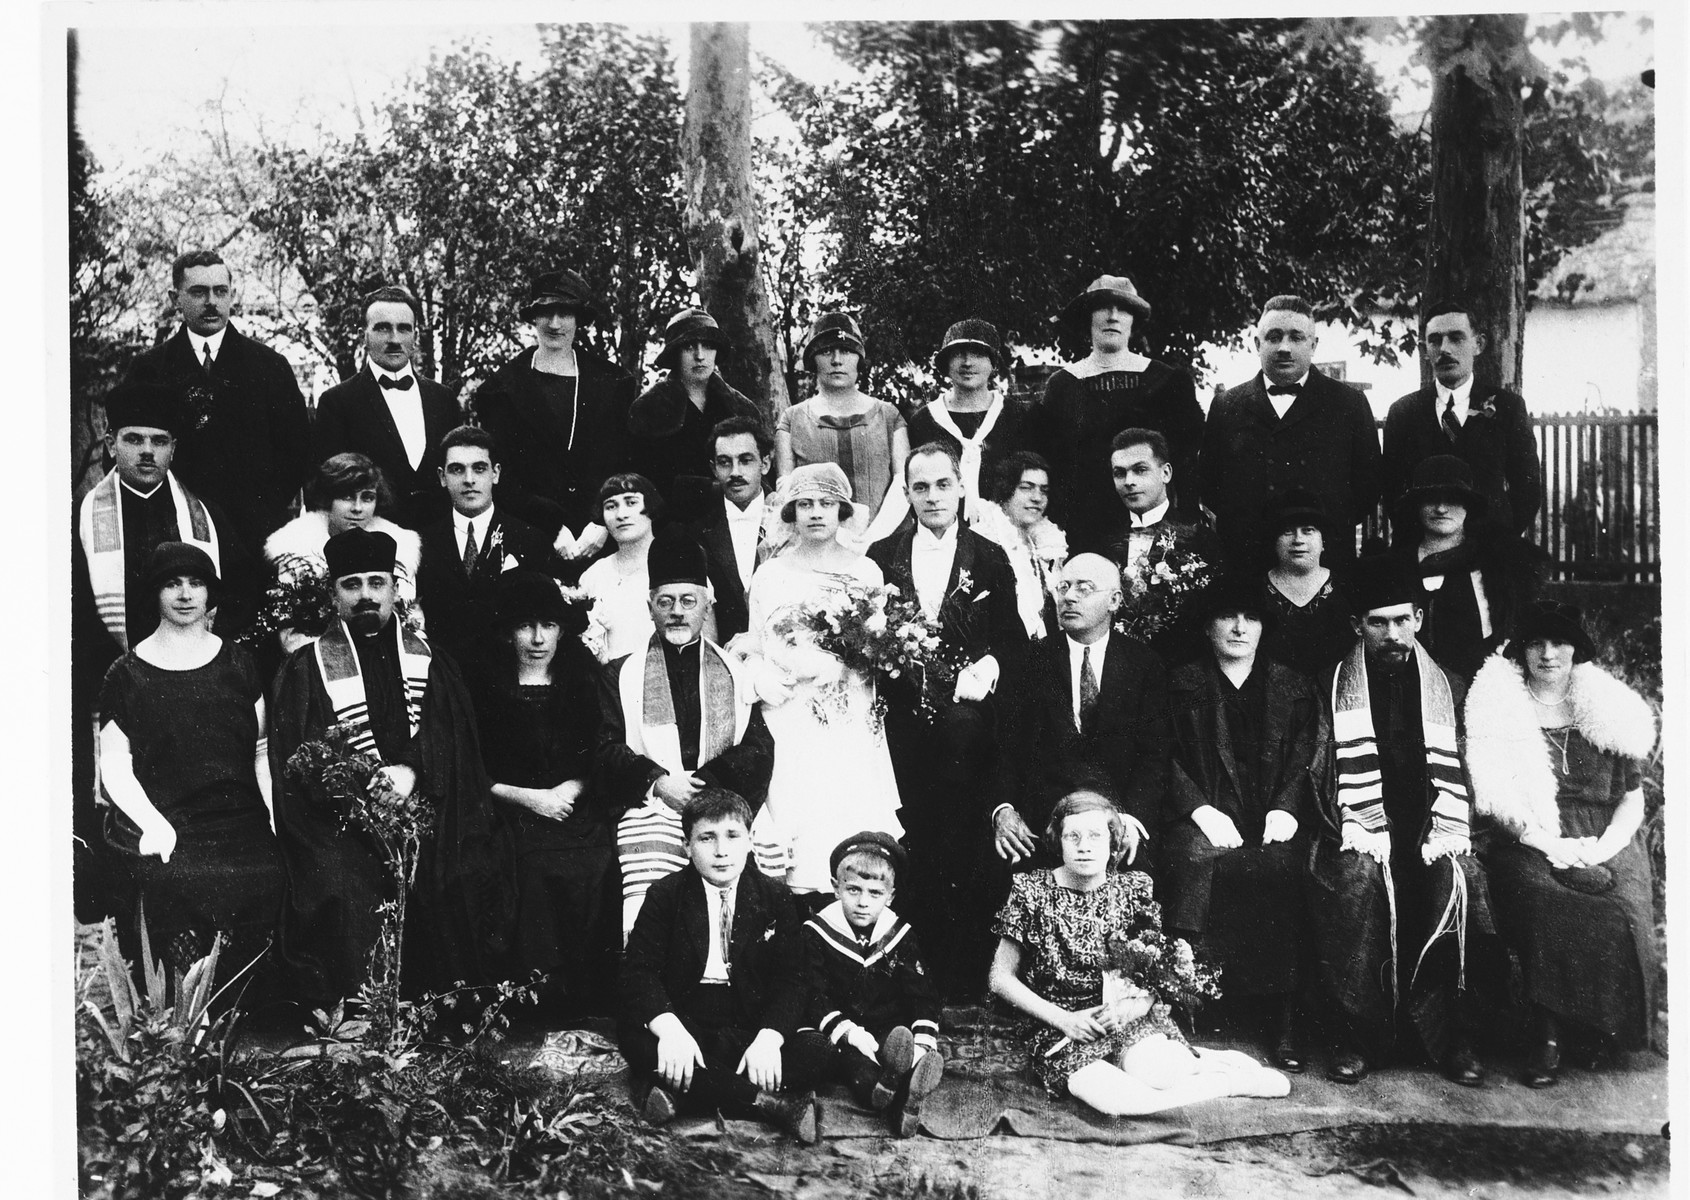 Group portrait of family and friends at the wedding of a young Jewish couple, Blanka Deutsch and Rudi Apler, in Ludbreg, Croatia.